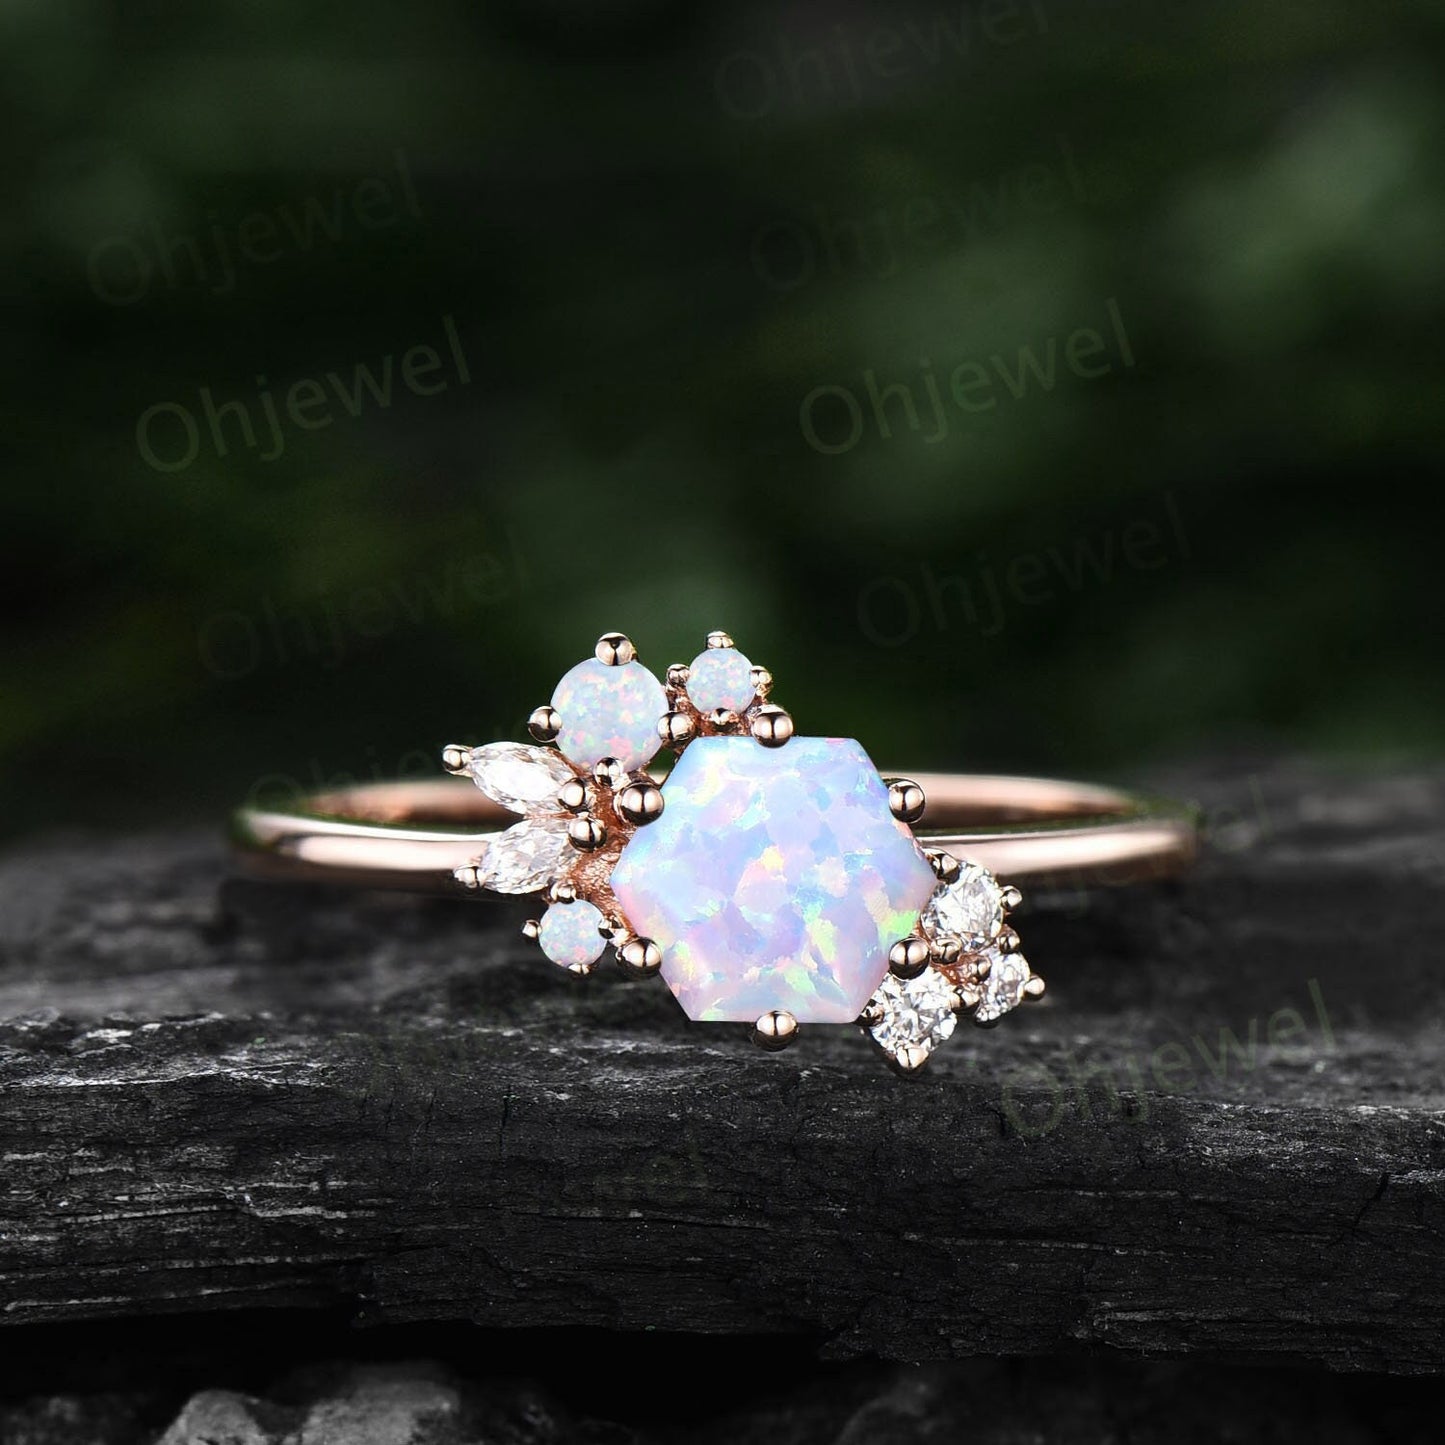 Hexagon cut white opal ring rose gold silver vintage unique opal engagement ring cluster art deco diamond promise wedding ring for women